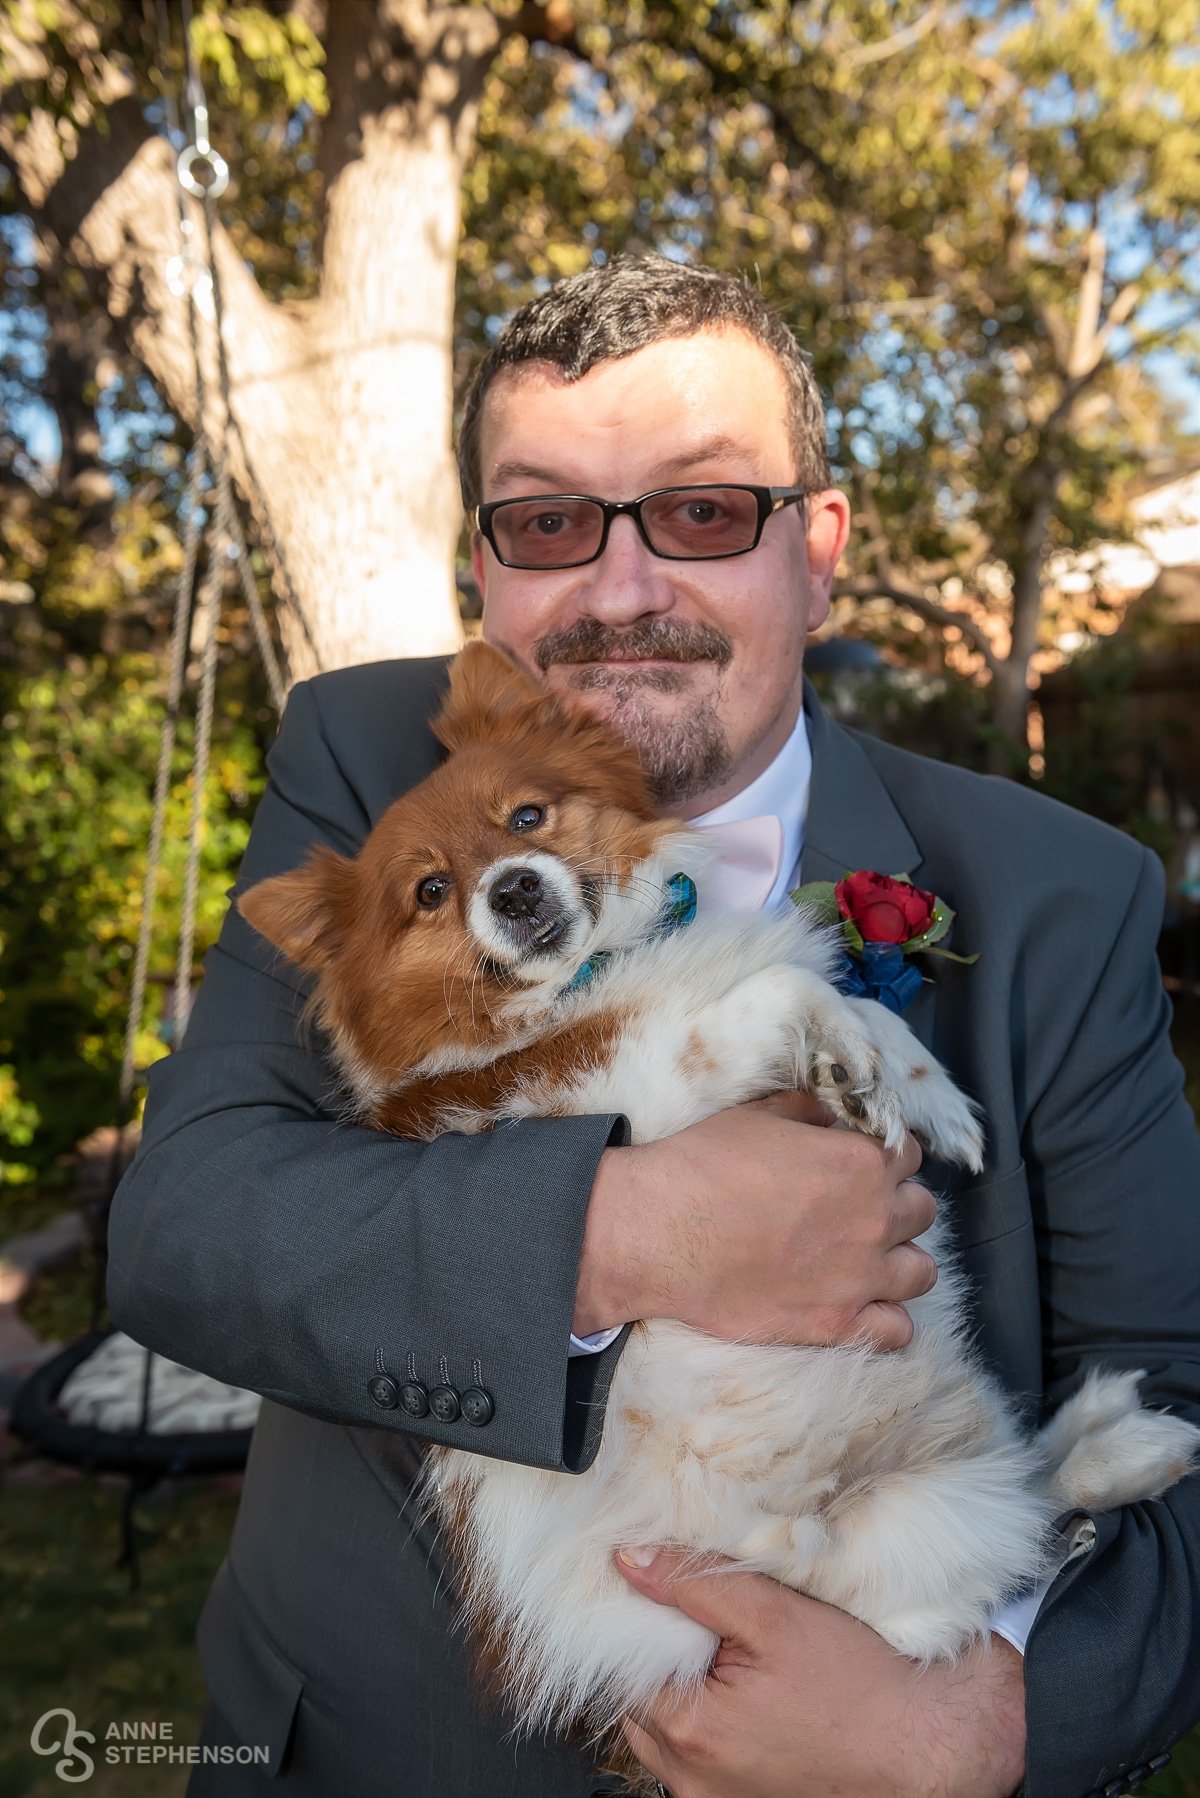 The groom holds a well groomed puppy wearing a bow tie.